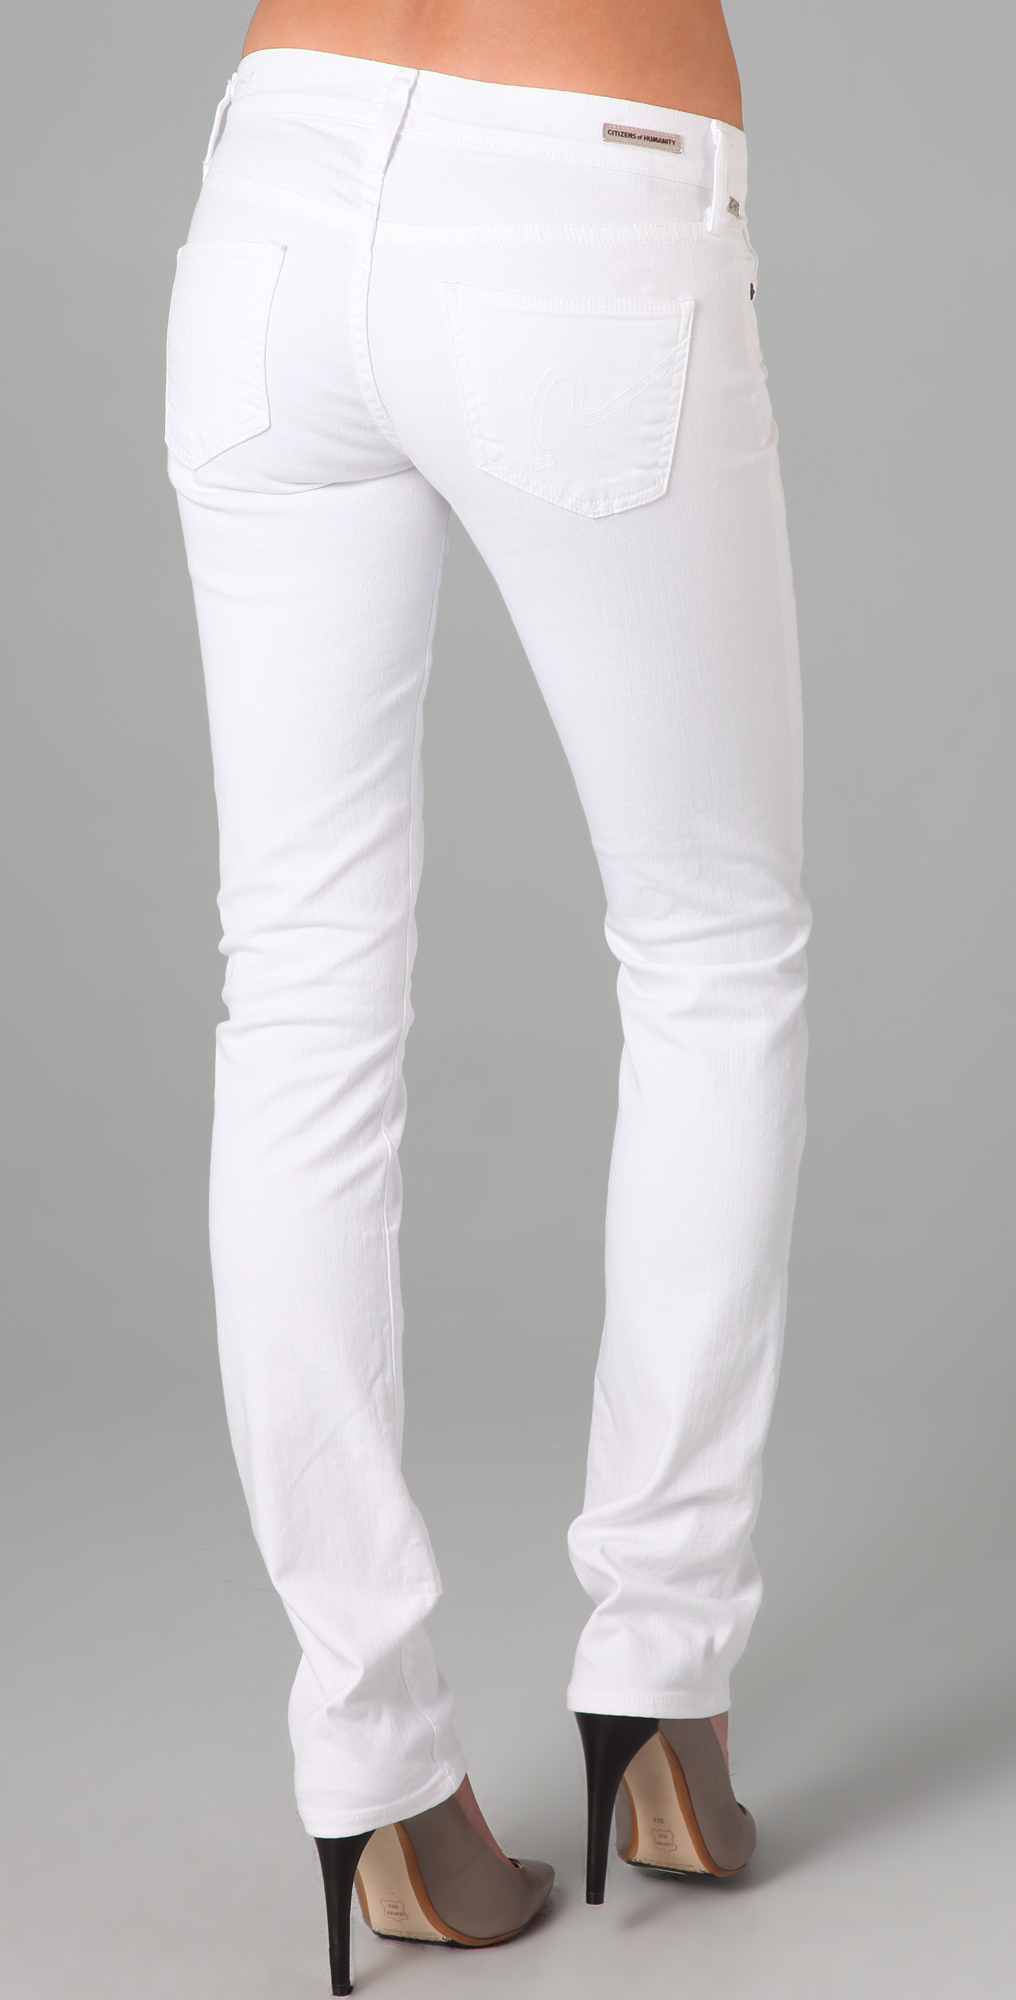 Citizens of Humanity Ava Straight Leg Jeans in White